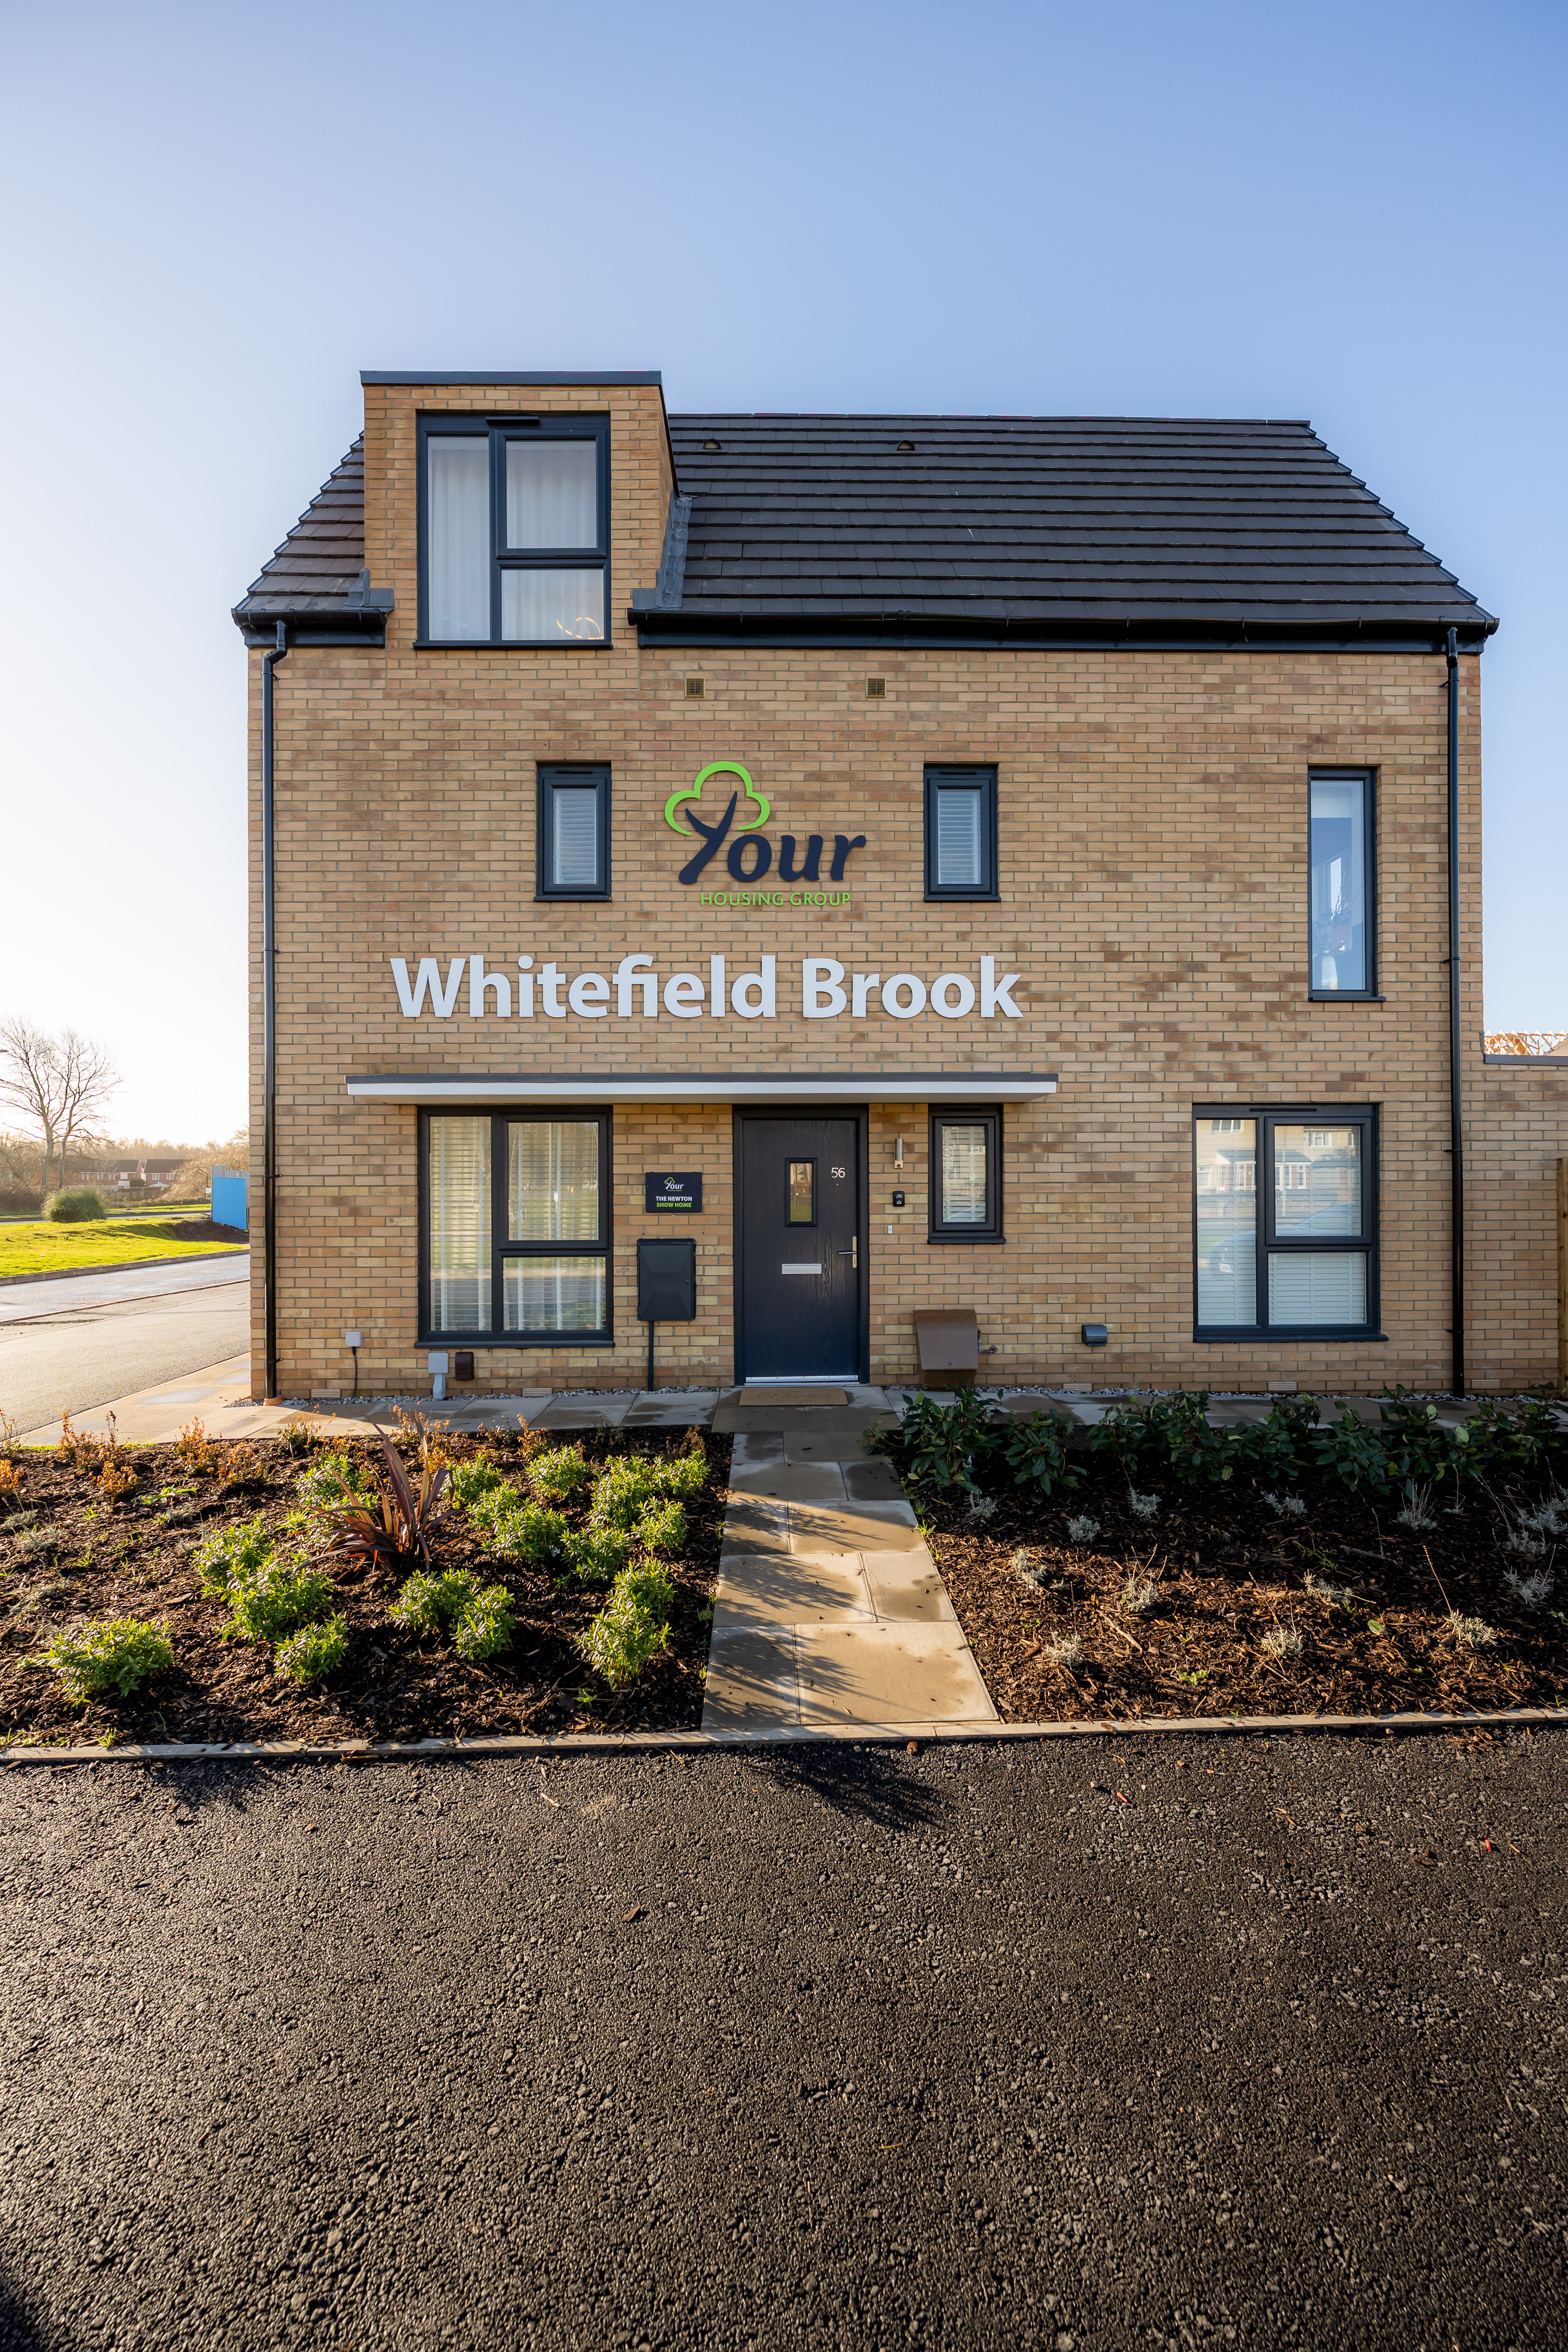 Whitefield Brook - The Newton show home